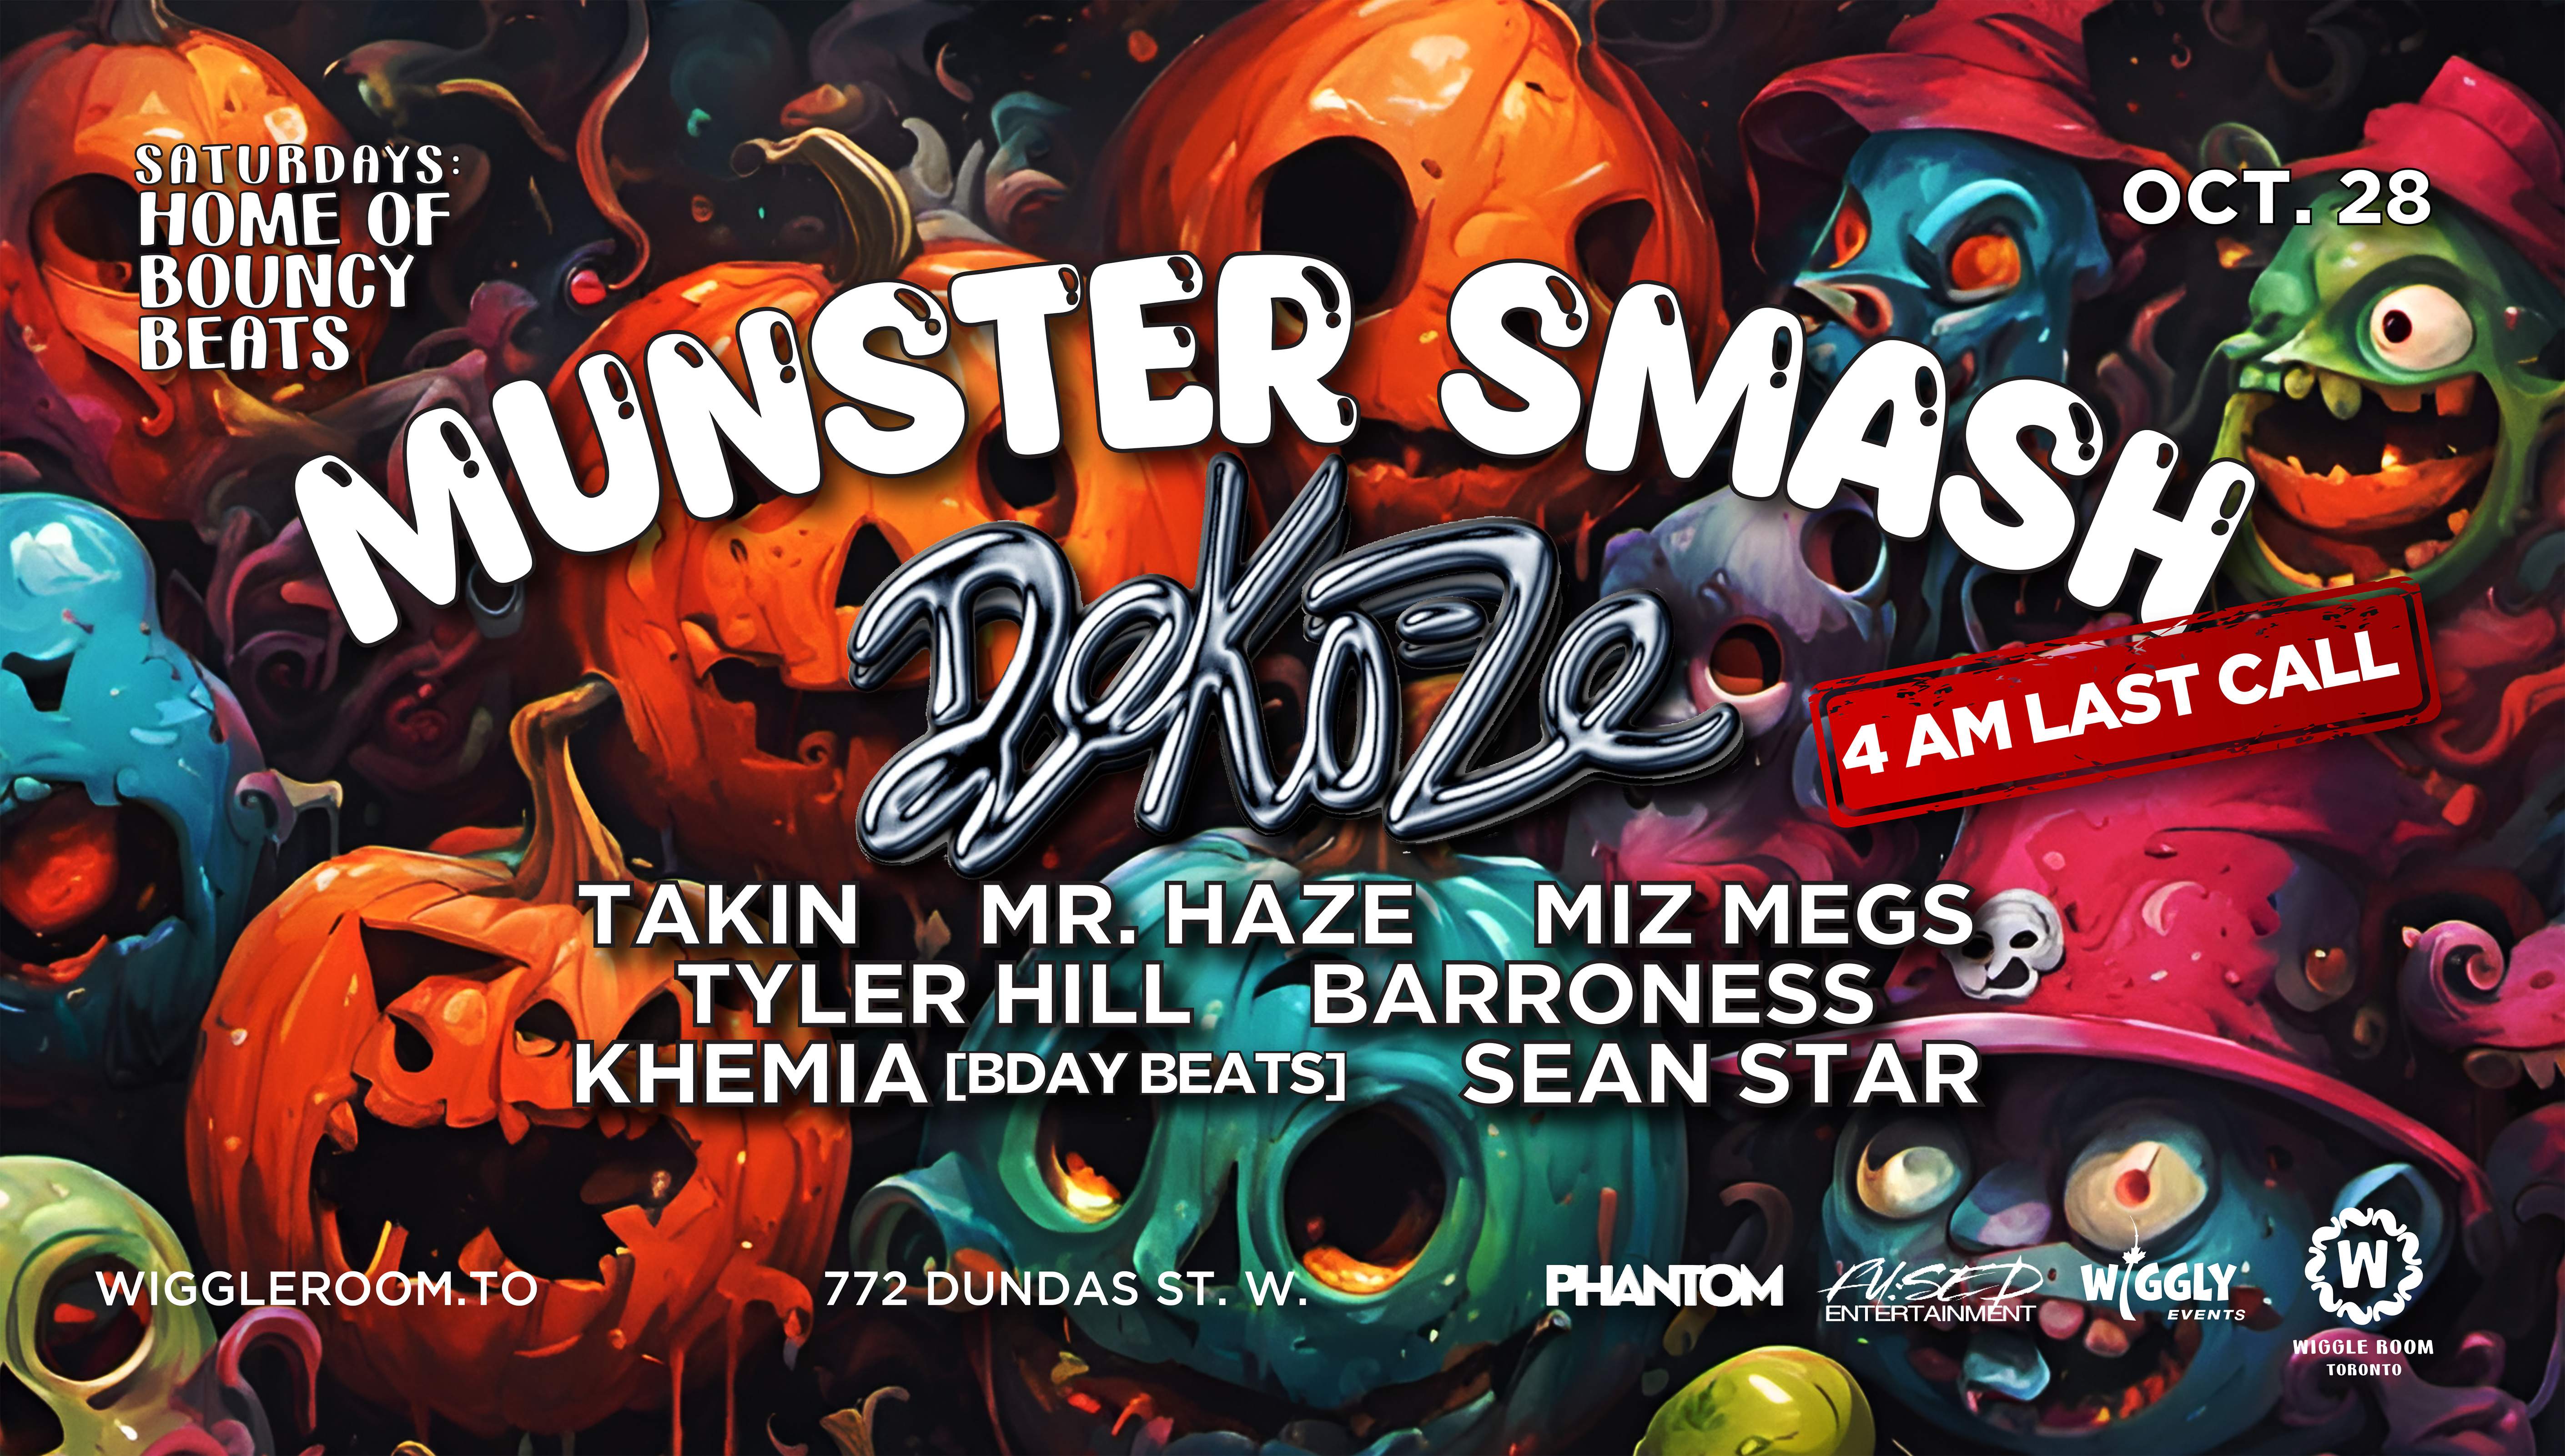 Halloween + Afterparty - Munster Smash | 4AM LAST CALL - フライヤー表